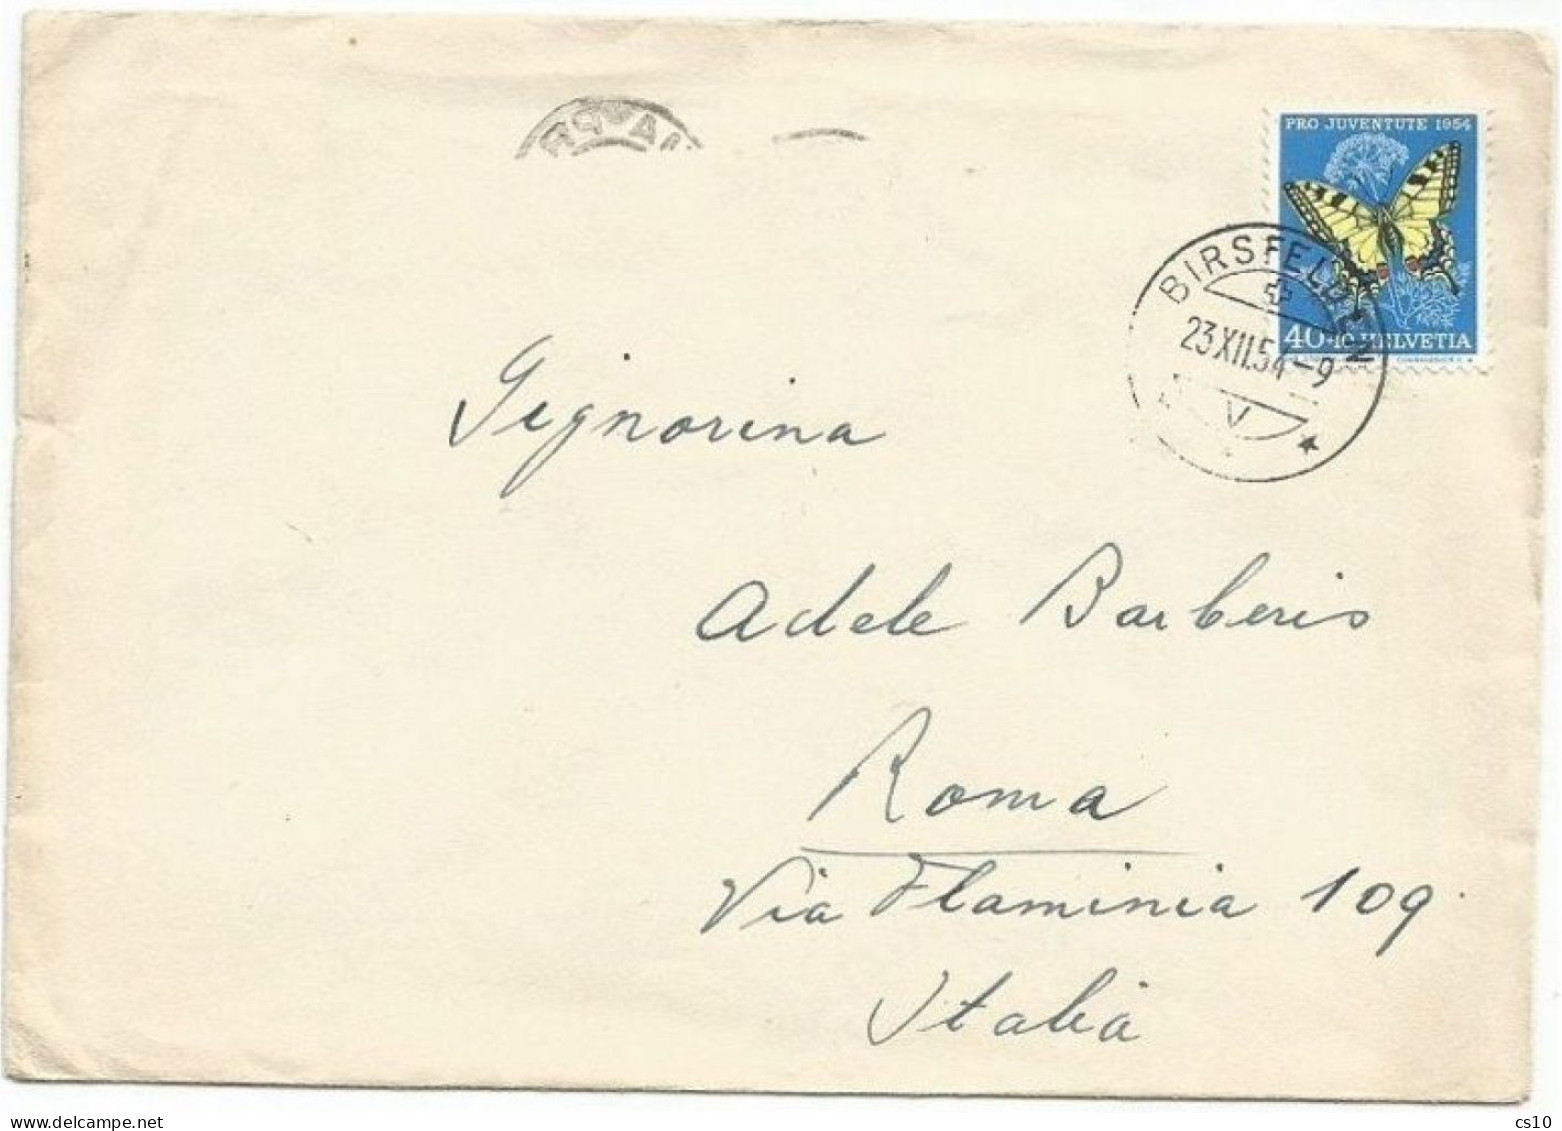 Suisse Pro Juventute 1954 Butterfly C.40+10 Solo Franking CV Birsfelden 23dec1954 To Italy - Covers & Documents